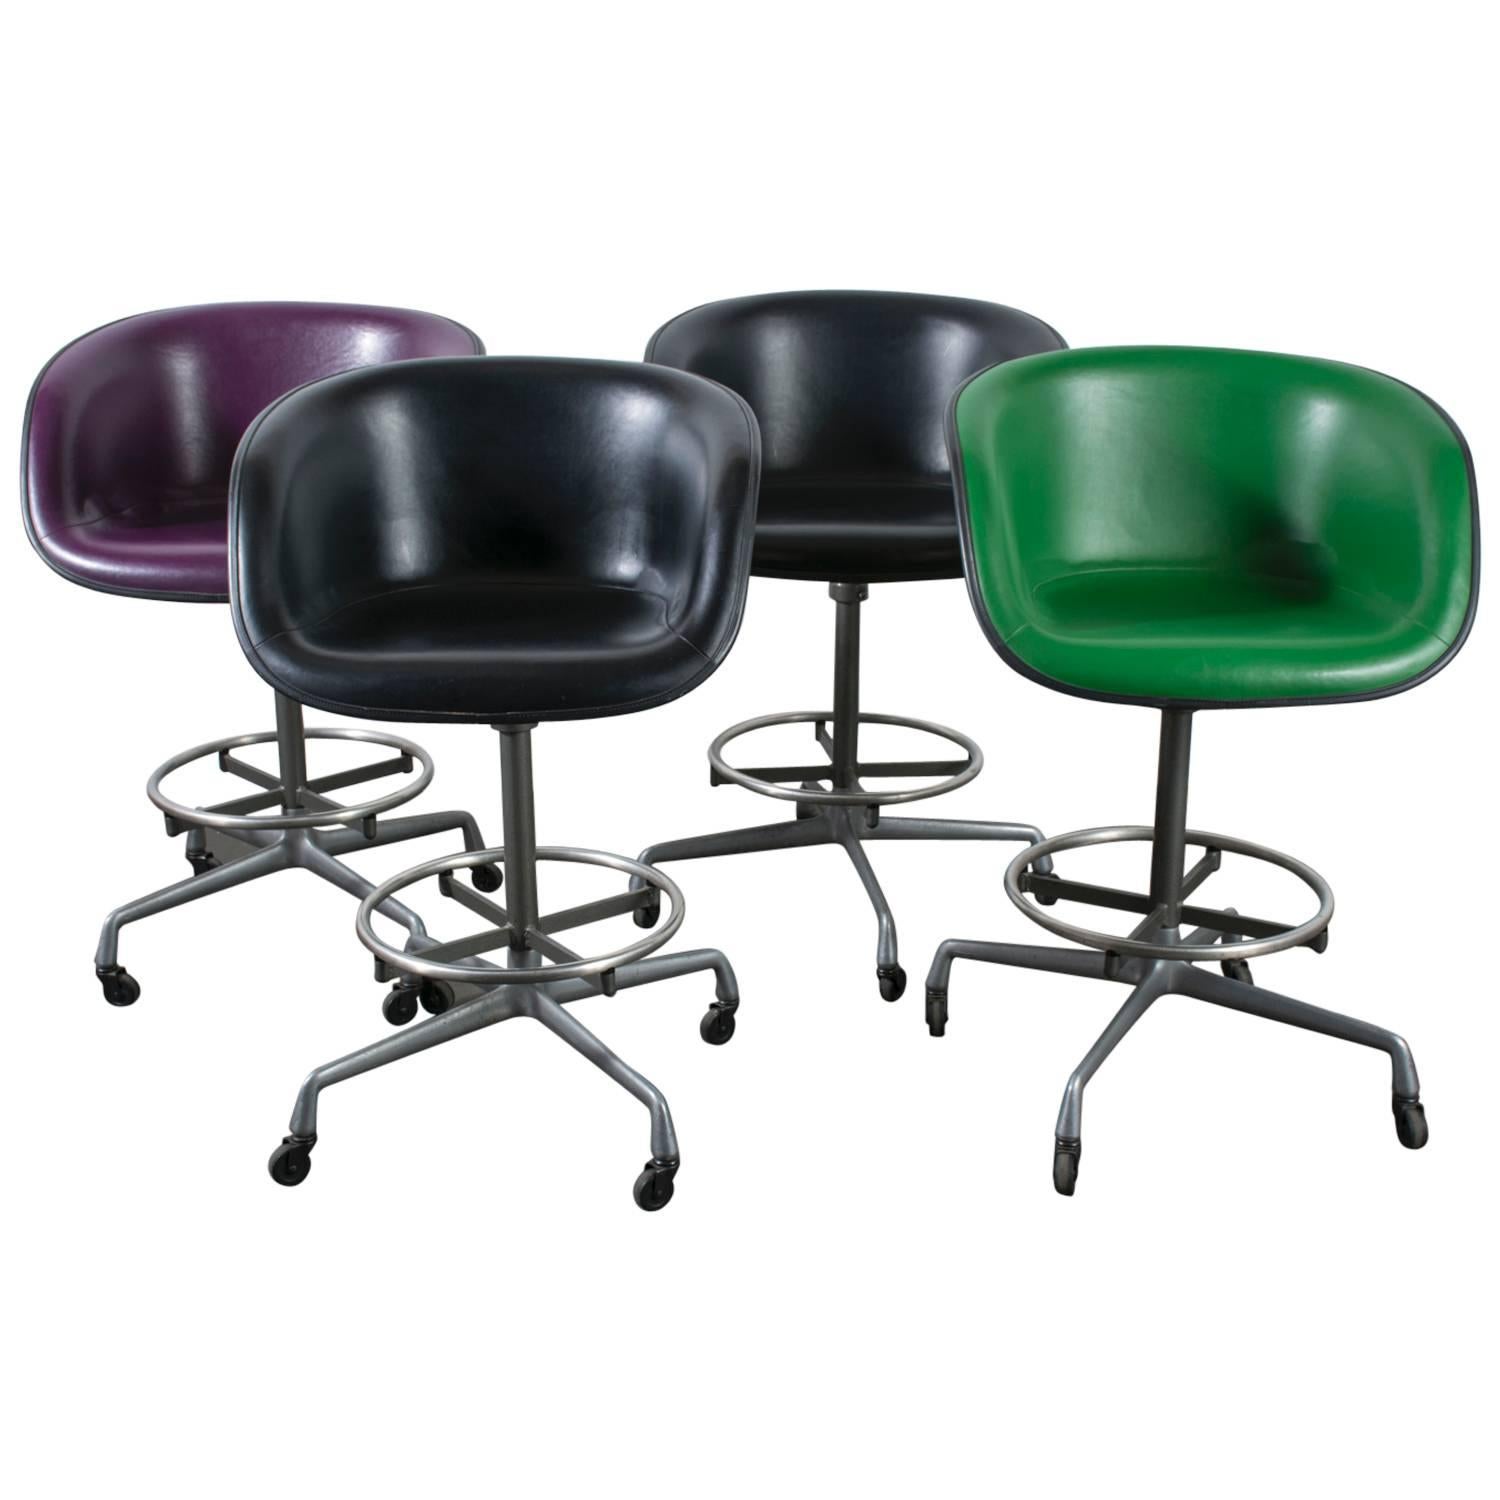 Set of Four Mid-Century Stools with La Fonda Seats by Charles and Ray Eames